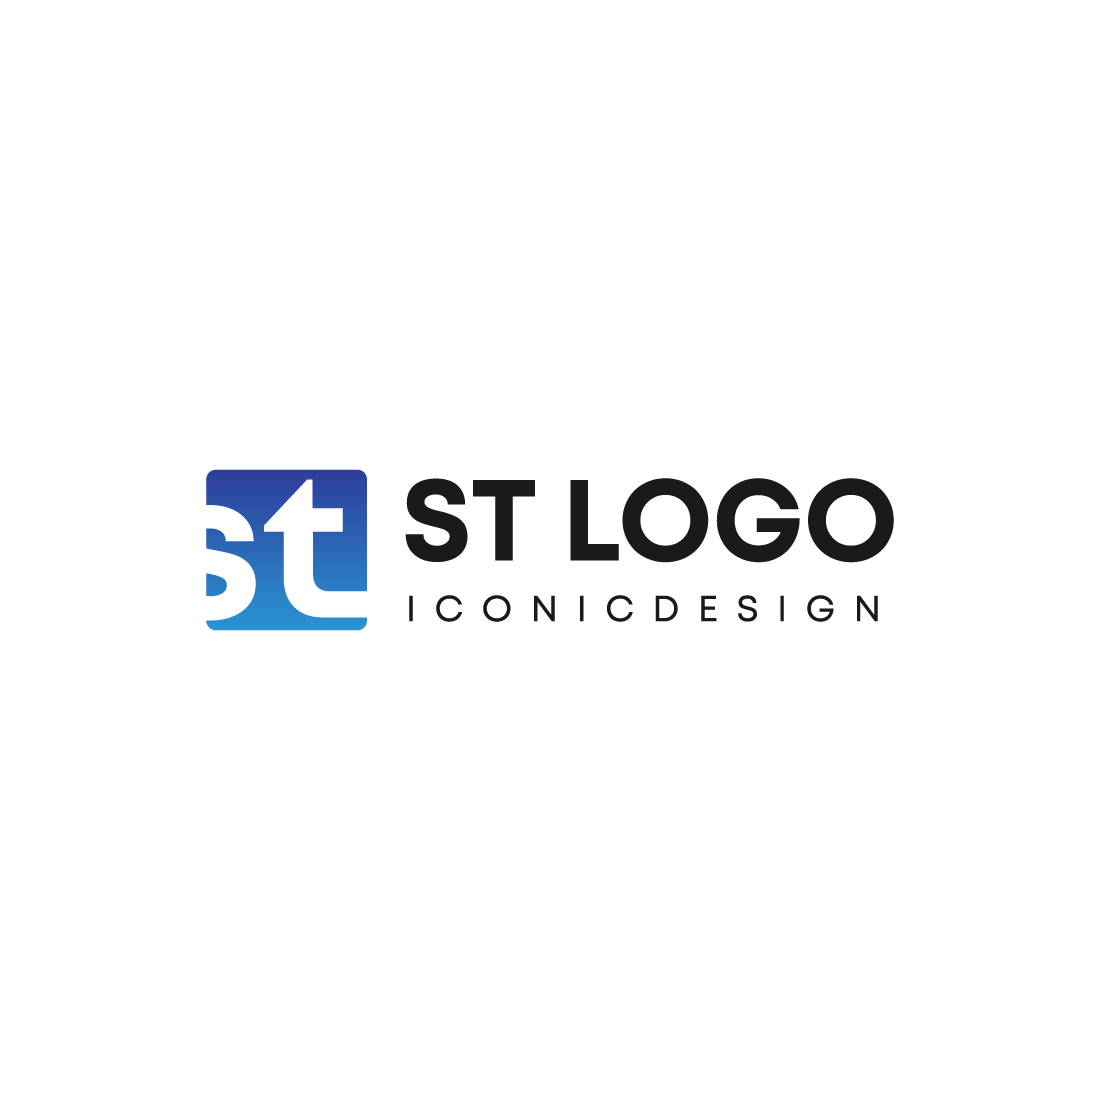 ST logo preview image.